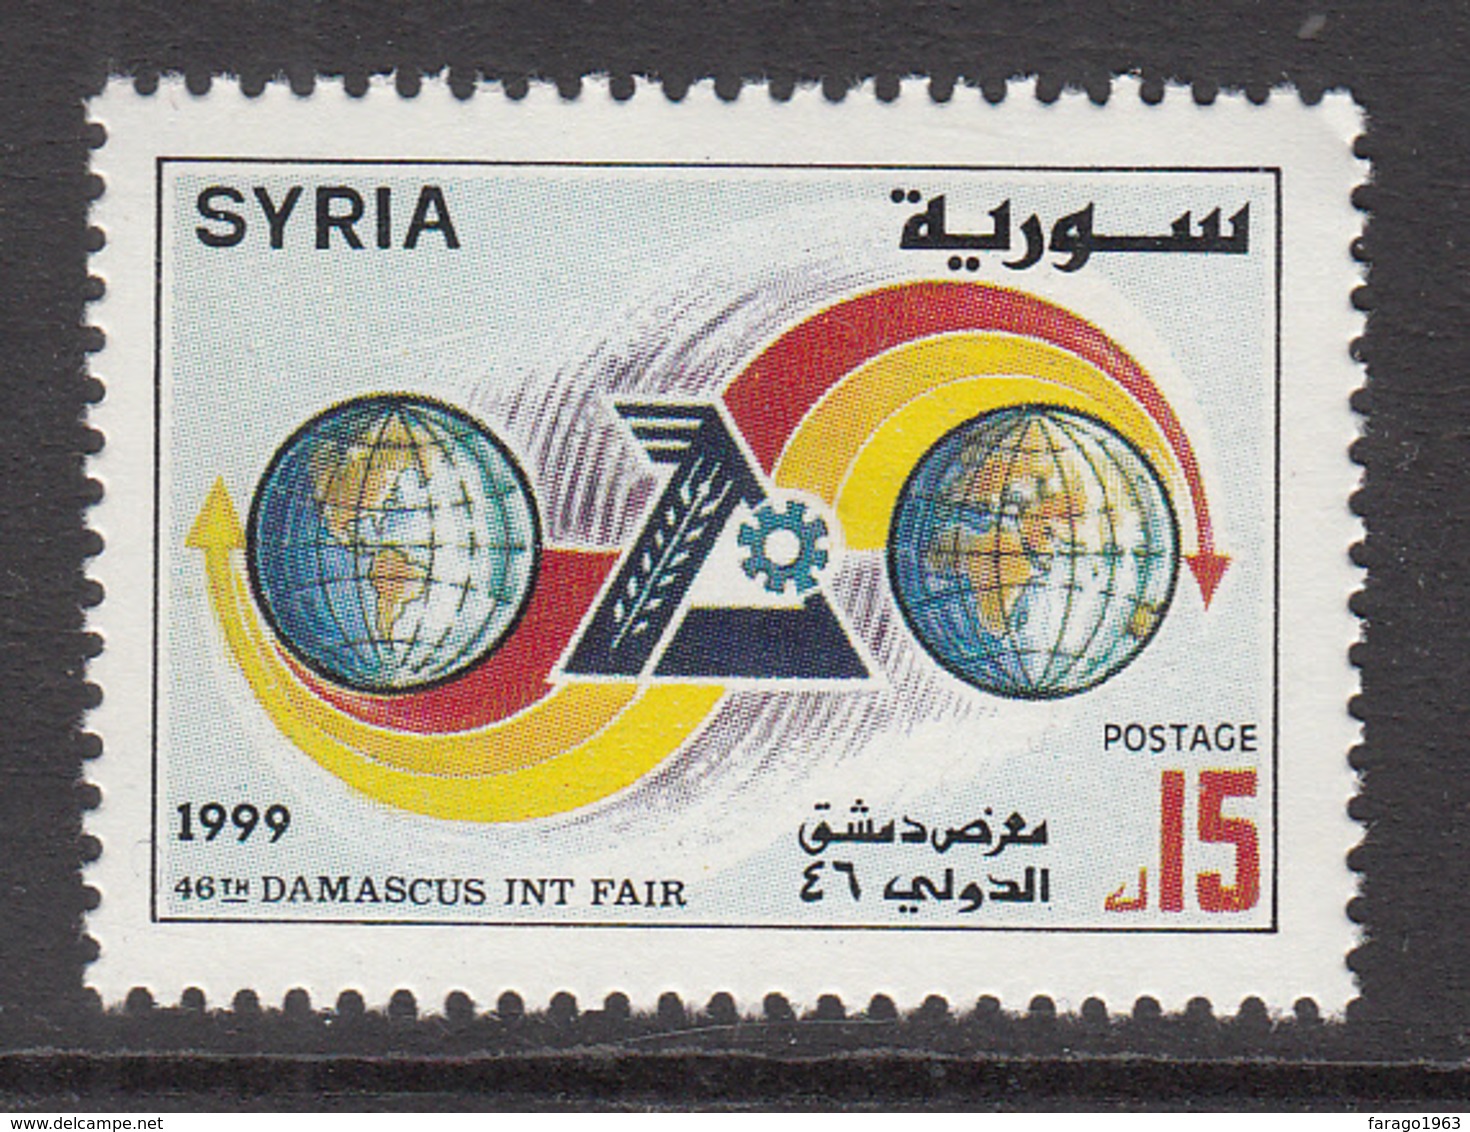 1999 Syria Damascus Intl Day Emblem Between Two Globes With Arrows Set Of 1 MNH - Syrien